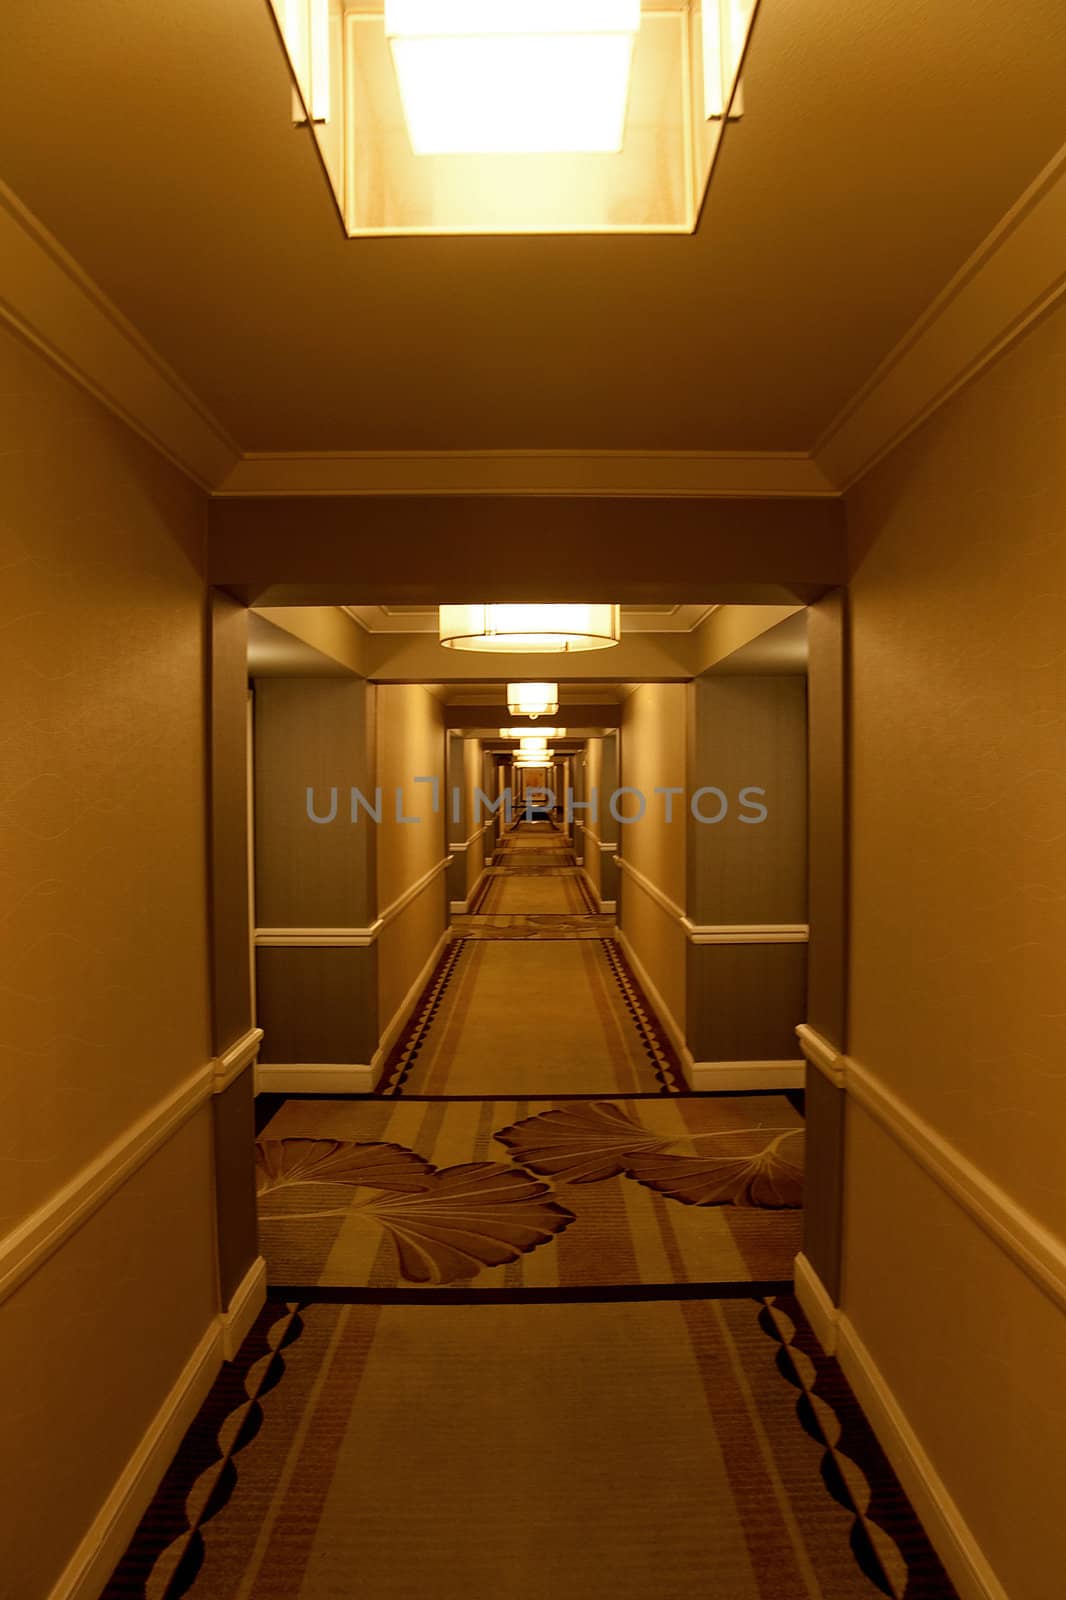 A long modern hotel hallway with rooms on either side